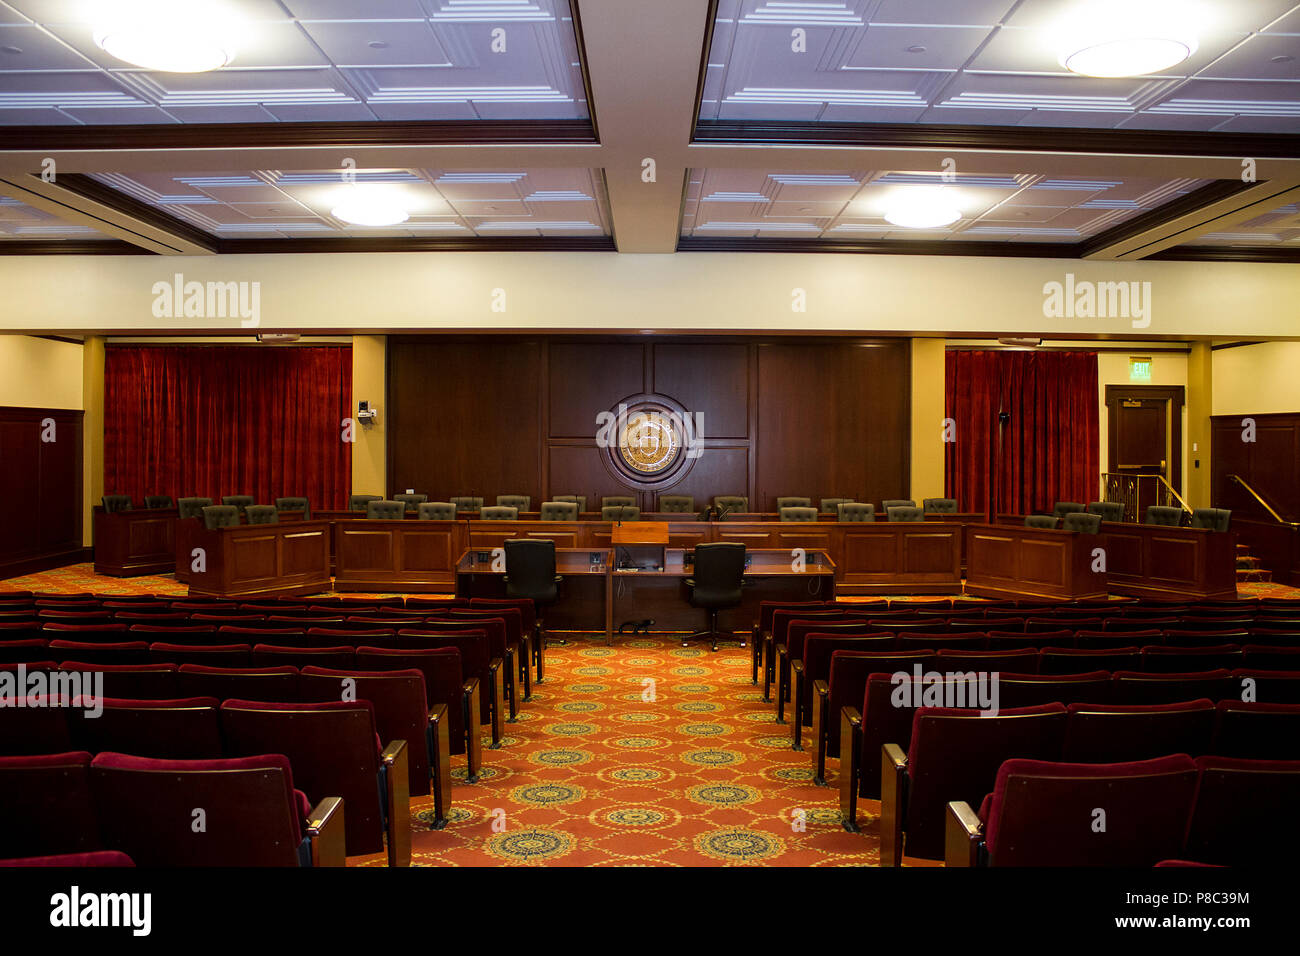 Wide view of the auditorium at the idaho state capitol in boise idaho. Stock Photo